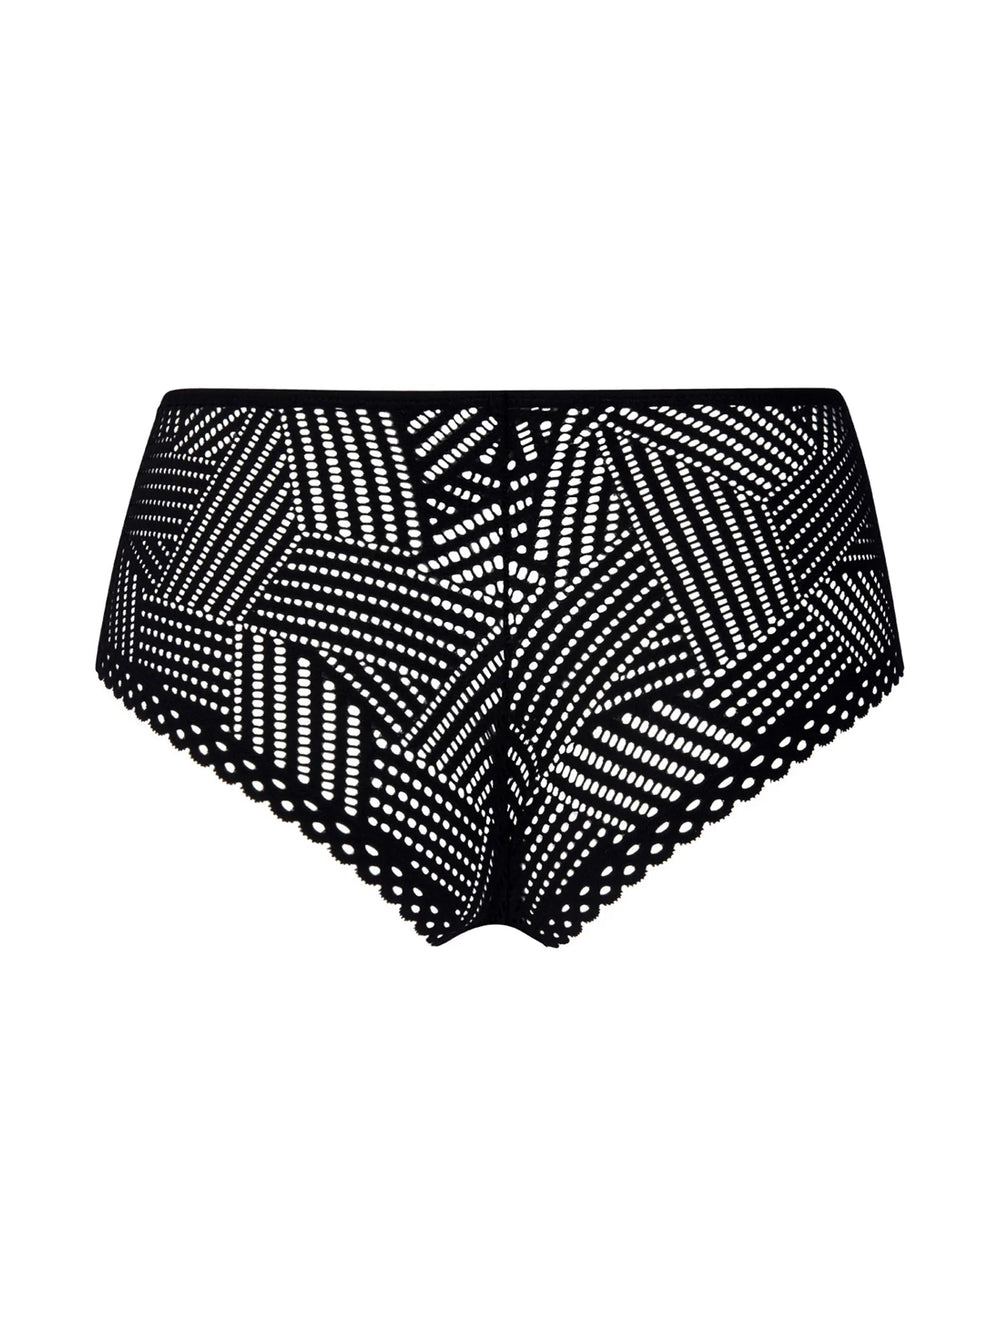 Antigel By Lise Charmel Tressage Graphic Boyshort - Tressage Noir Shorty Antigel от Lise Charmel